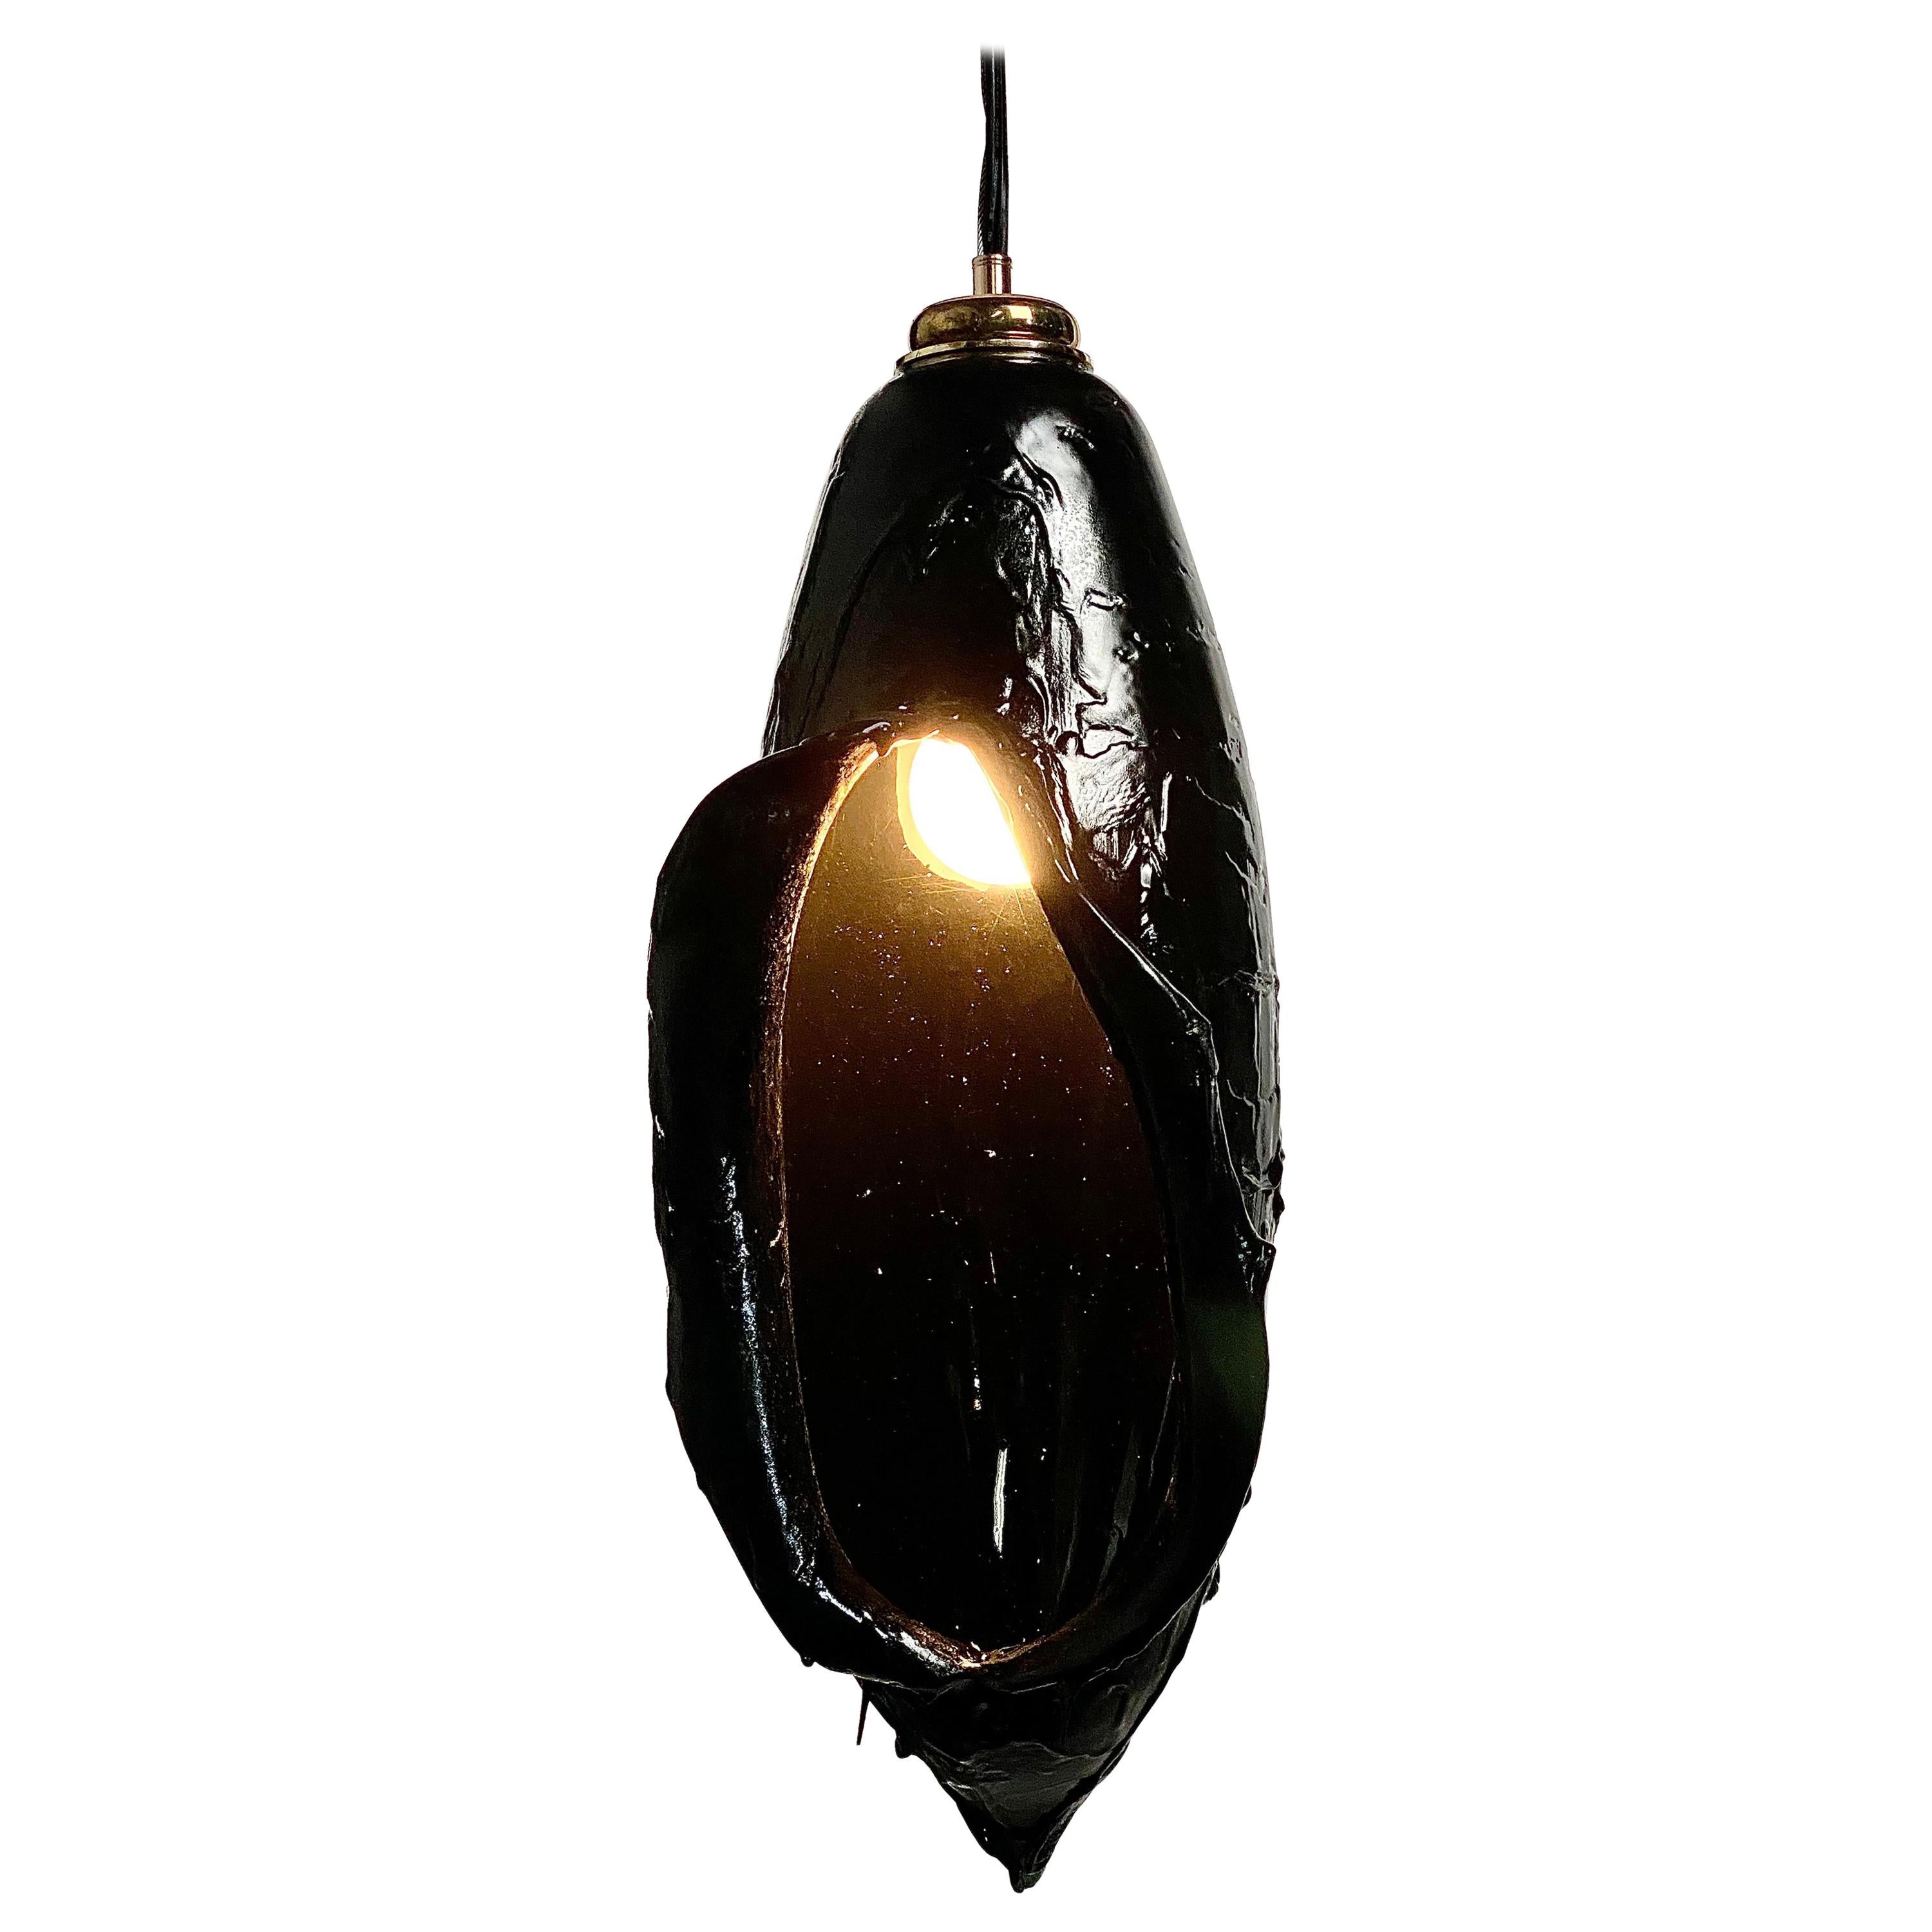 Blown Glass Black Rubber Pendent or Table Light, 21st Century by Mattia Biagi For Sale